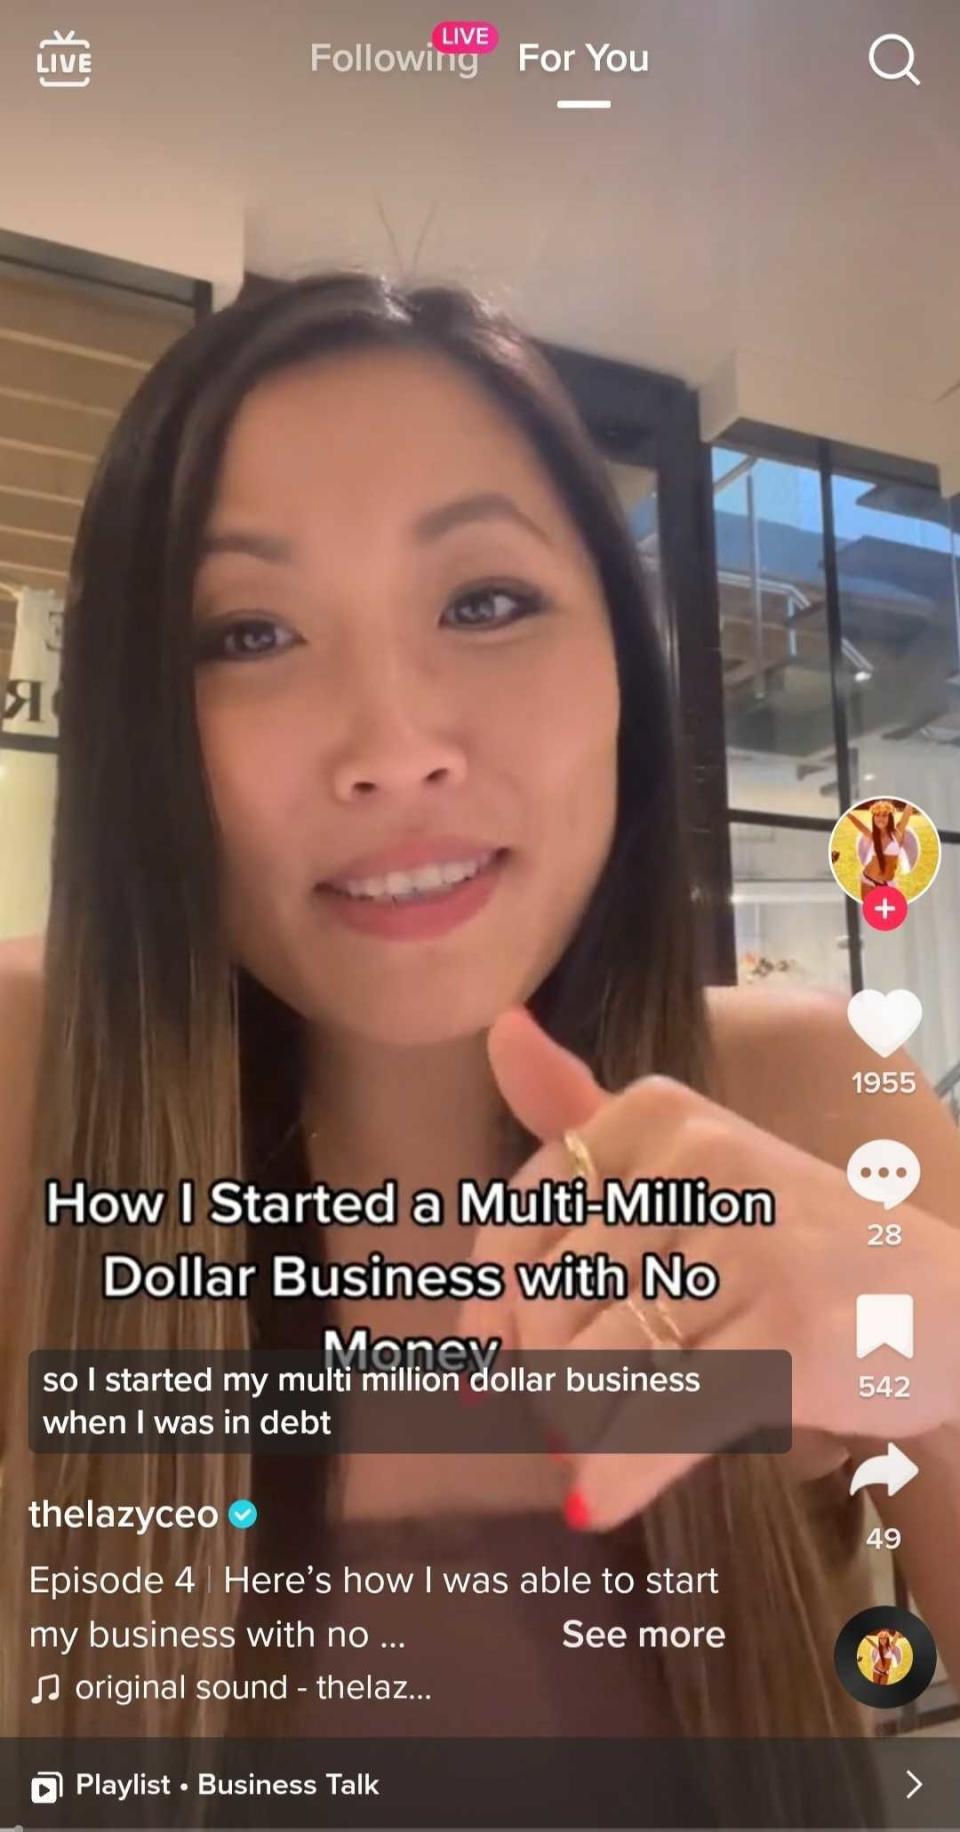 screenshot from Jane's TikTok video giving advice on how to start a business with no money